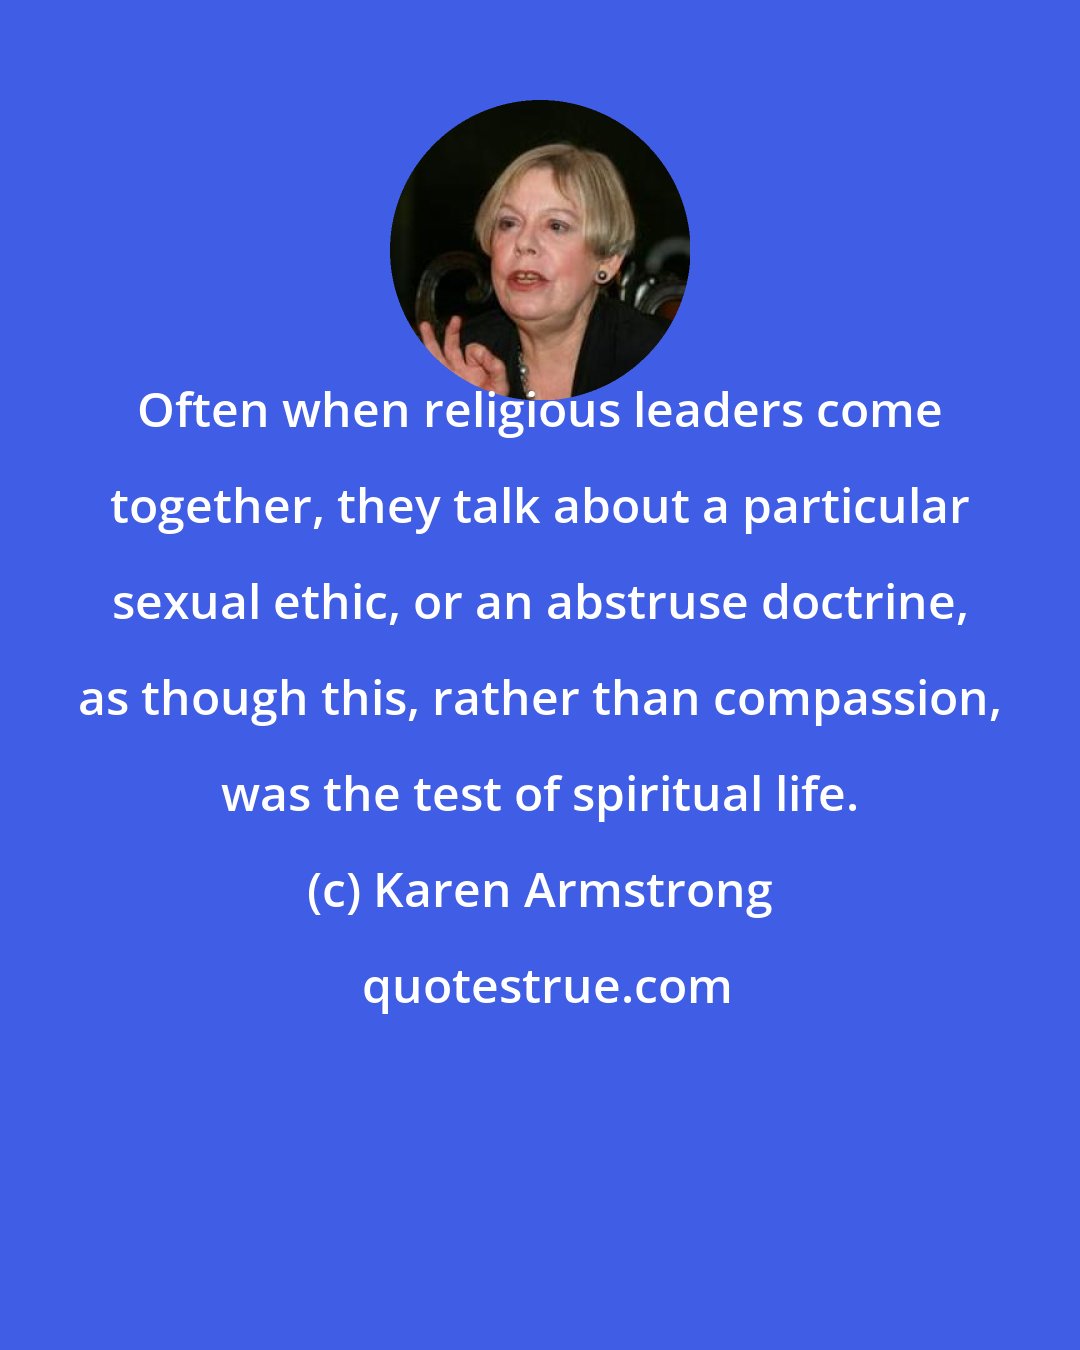 Karen Armstrong: Often when religious leaders come together, they talk about a particular sexual ethic, or an abstruse doctrine, as though this, rather than compassion, was the test of spiritual life.